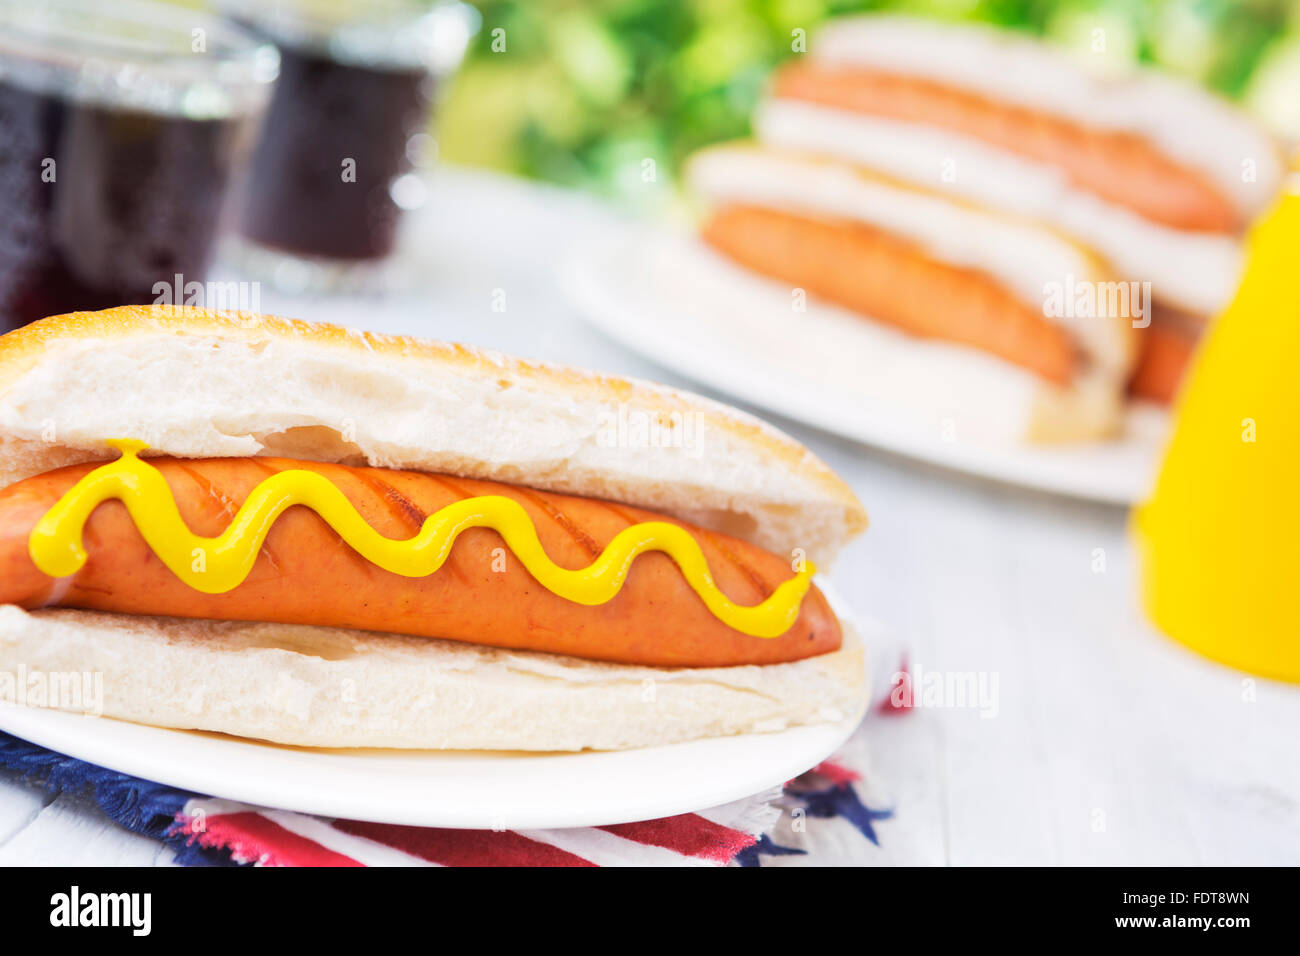 A tasty hot dog with mustard on an outdoor table. Stock Photo